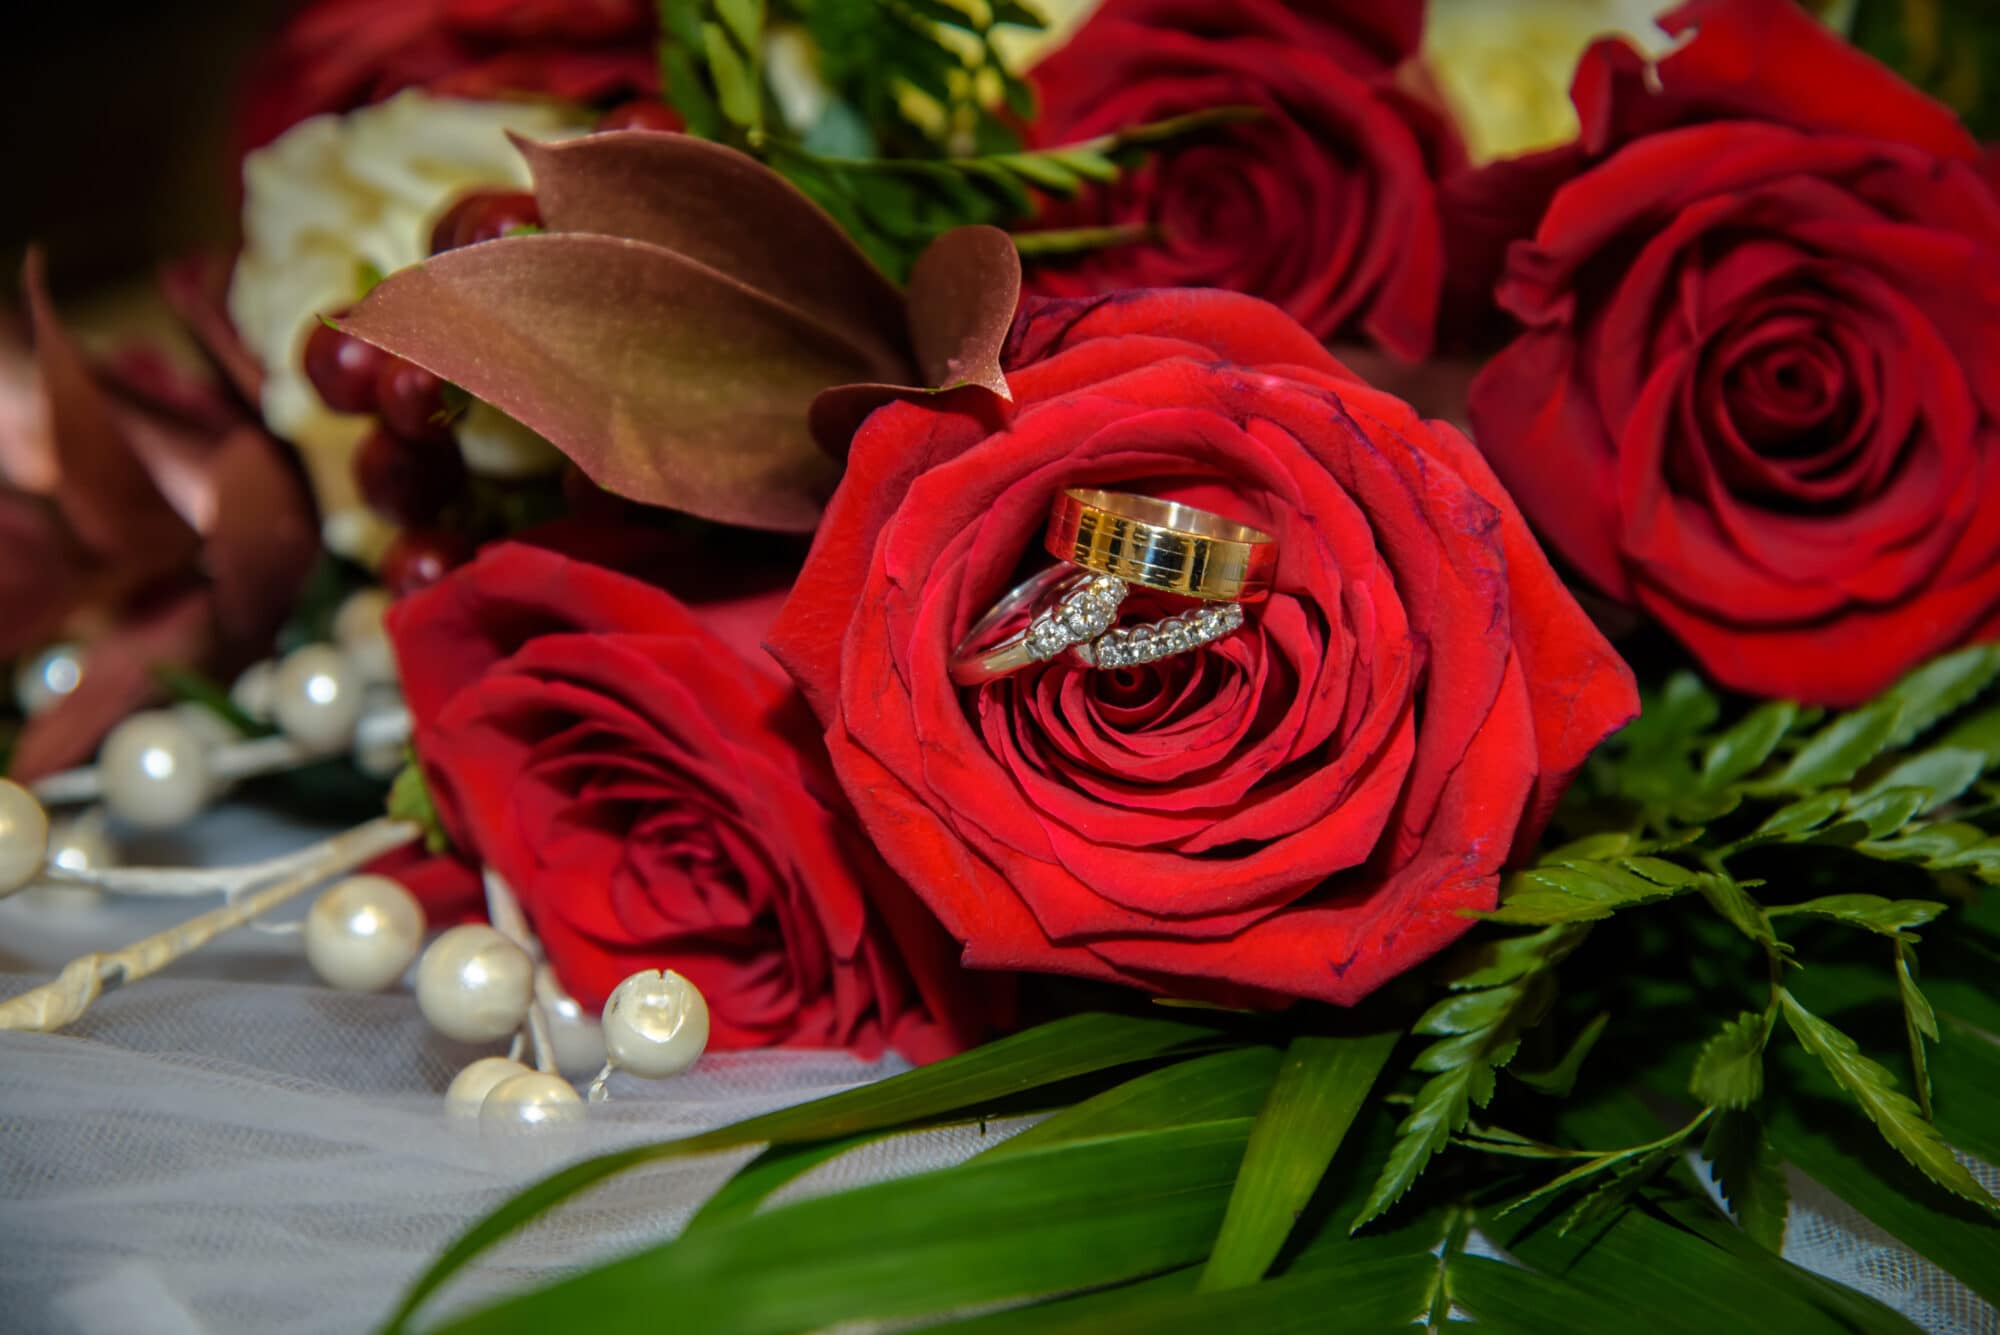 The bridal wedding bouquet of red roses with the wedding rings.